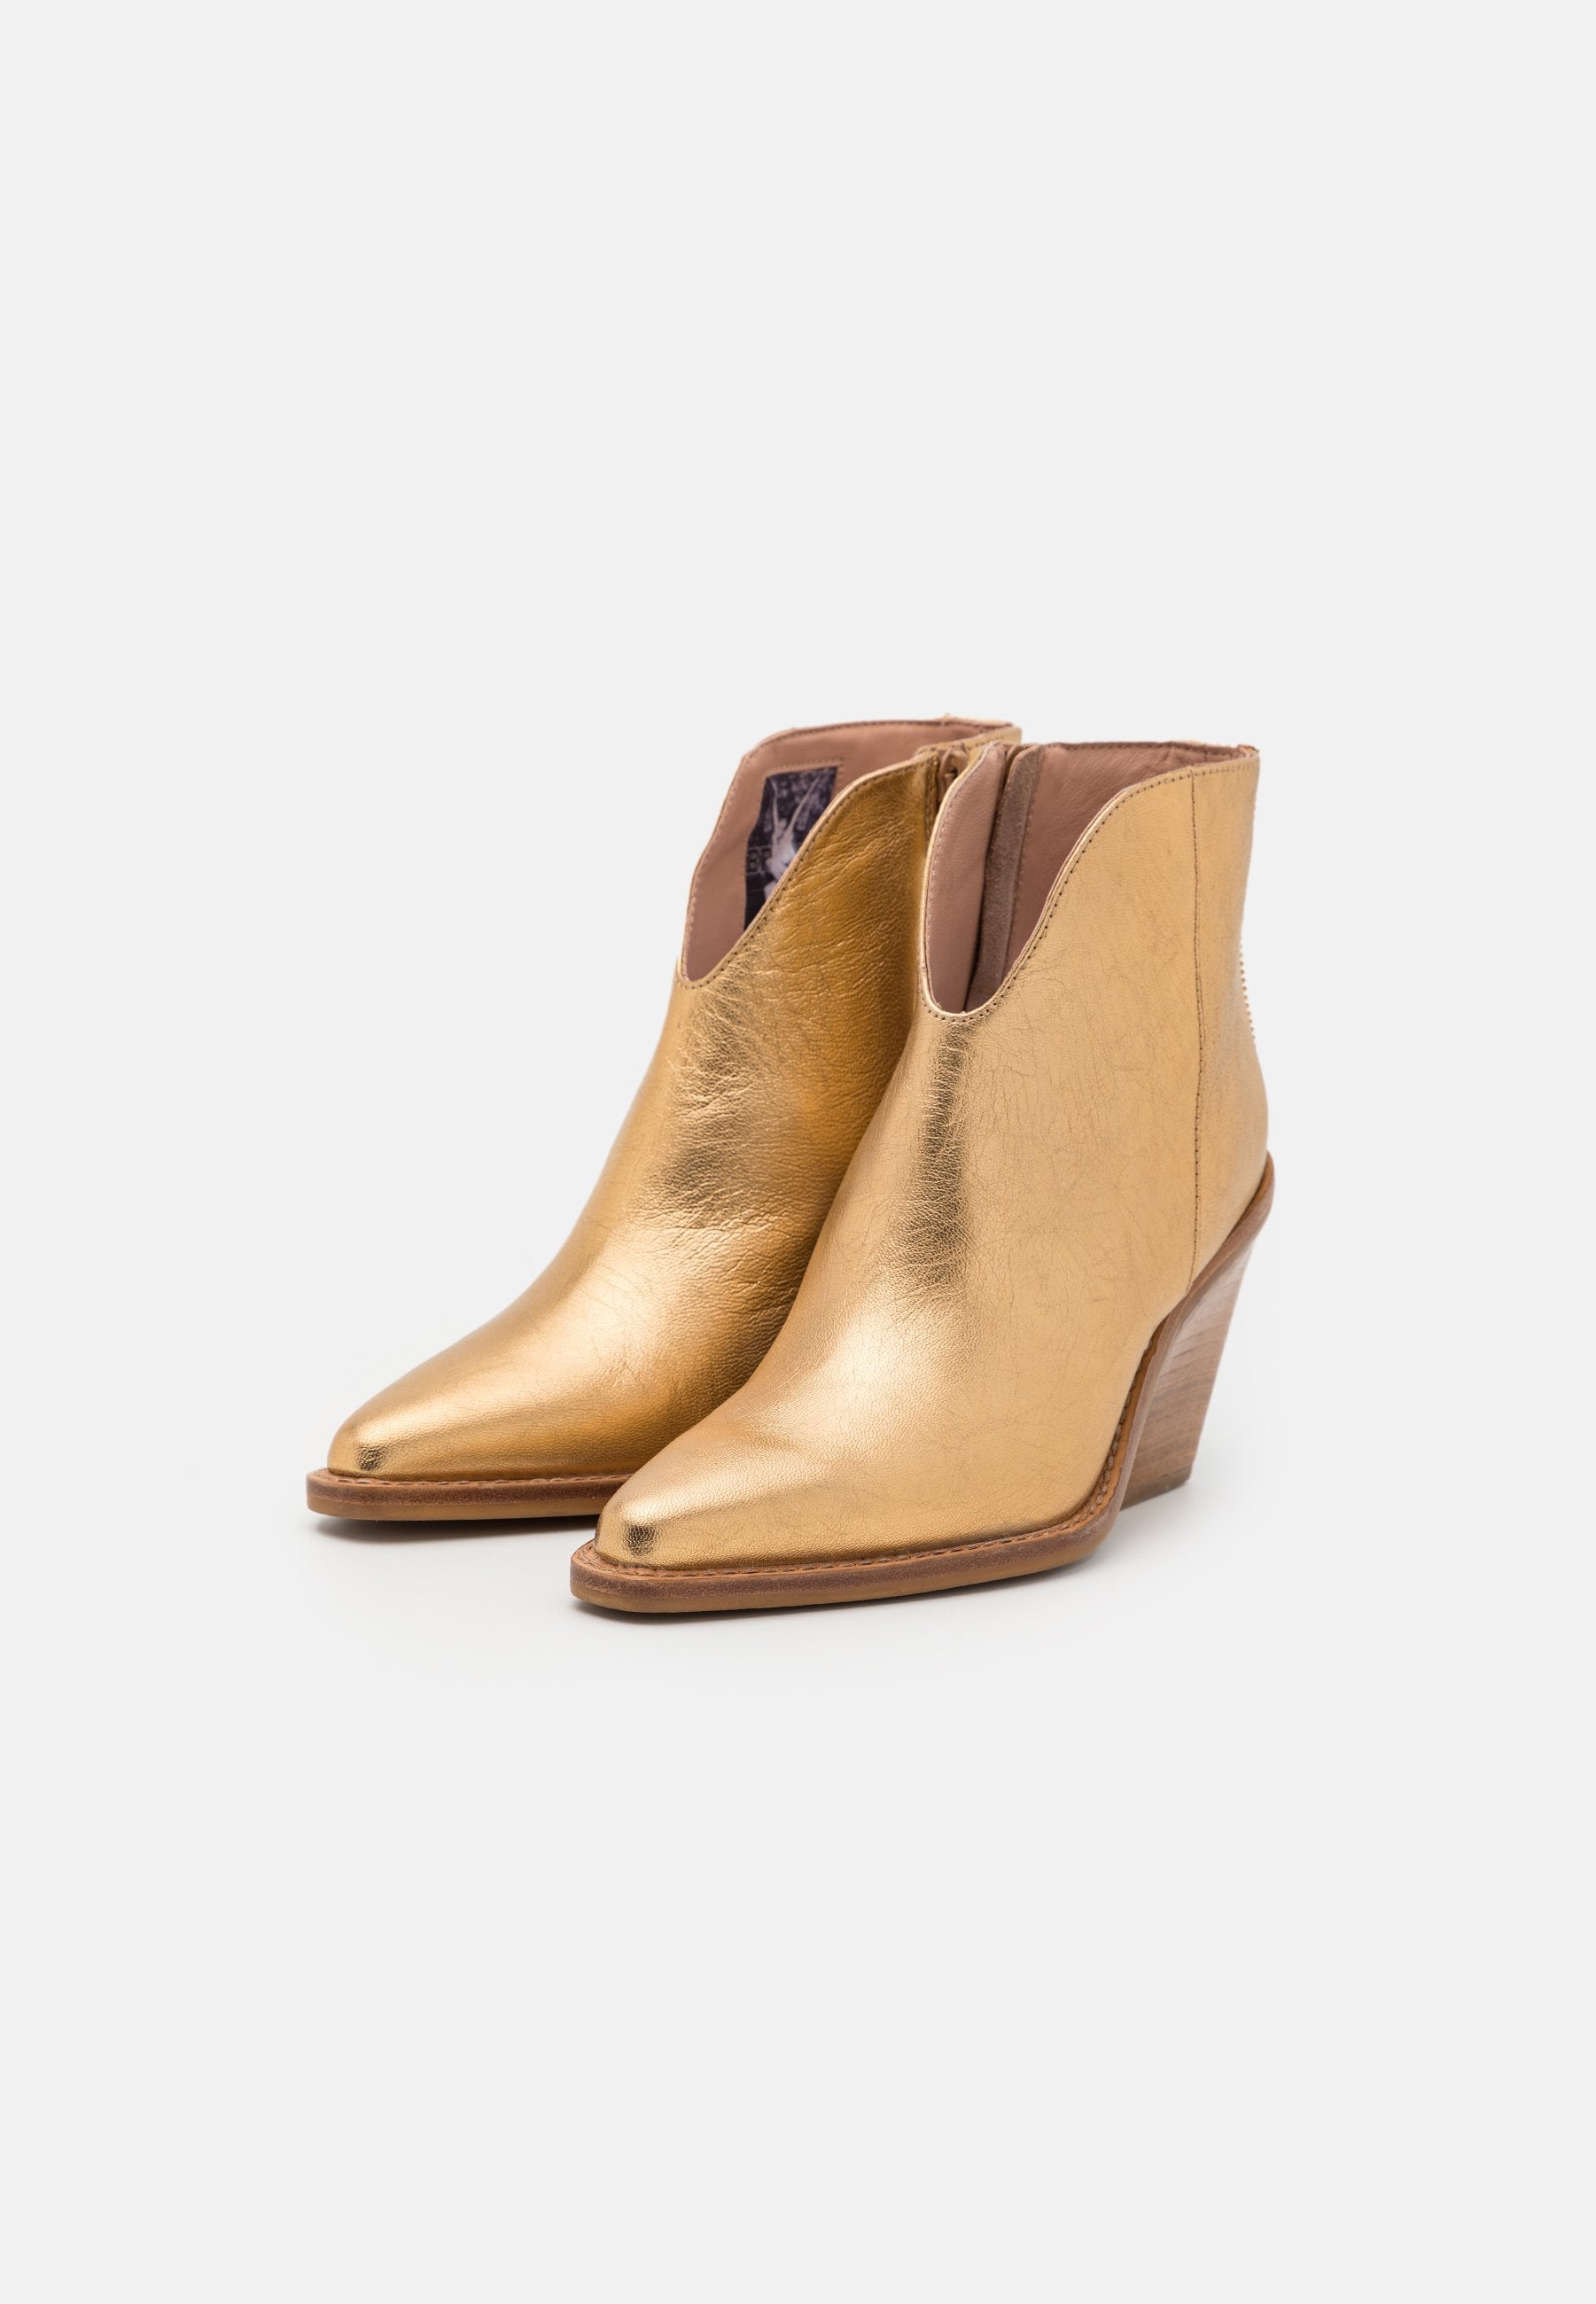 New Kole Gold Low Ankle Boots 34265-M-103 - 3